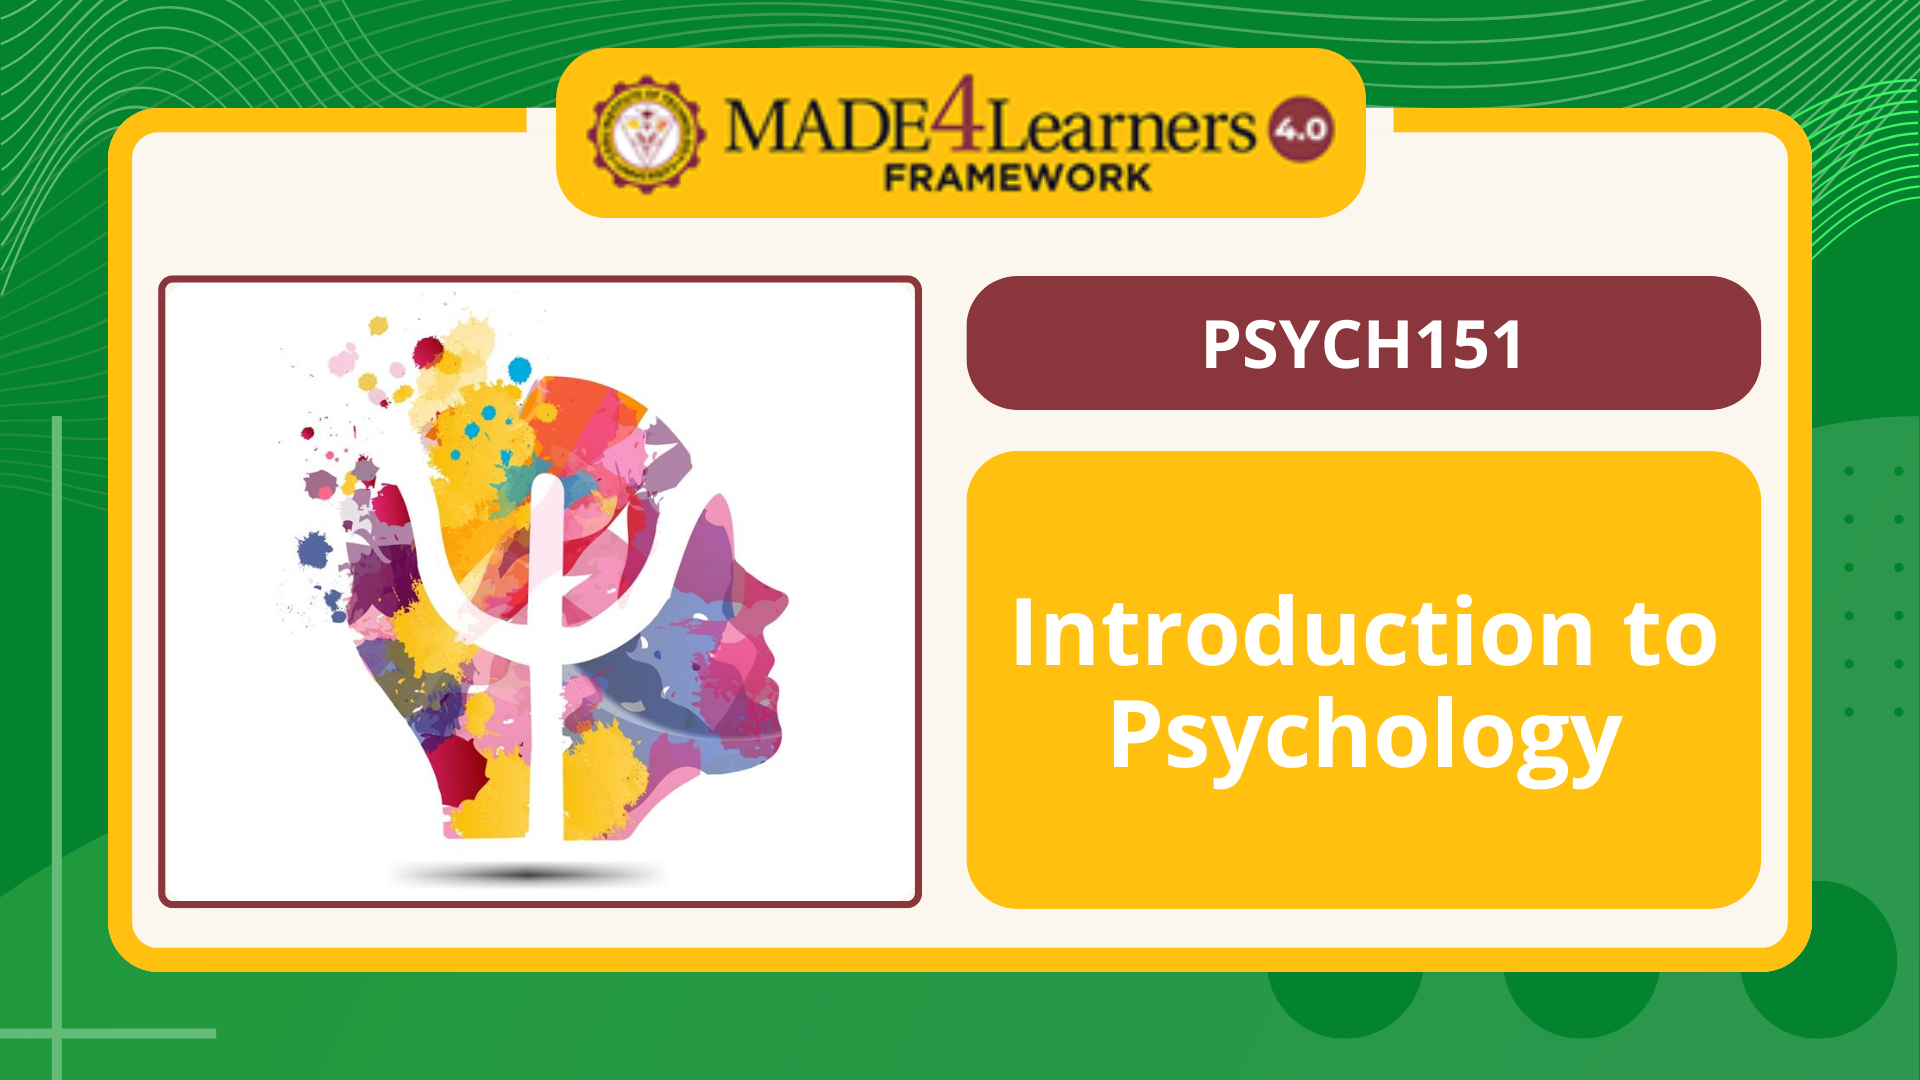 PSYCH151 Introduction to Psychology - E4.C1